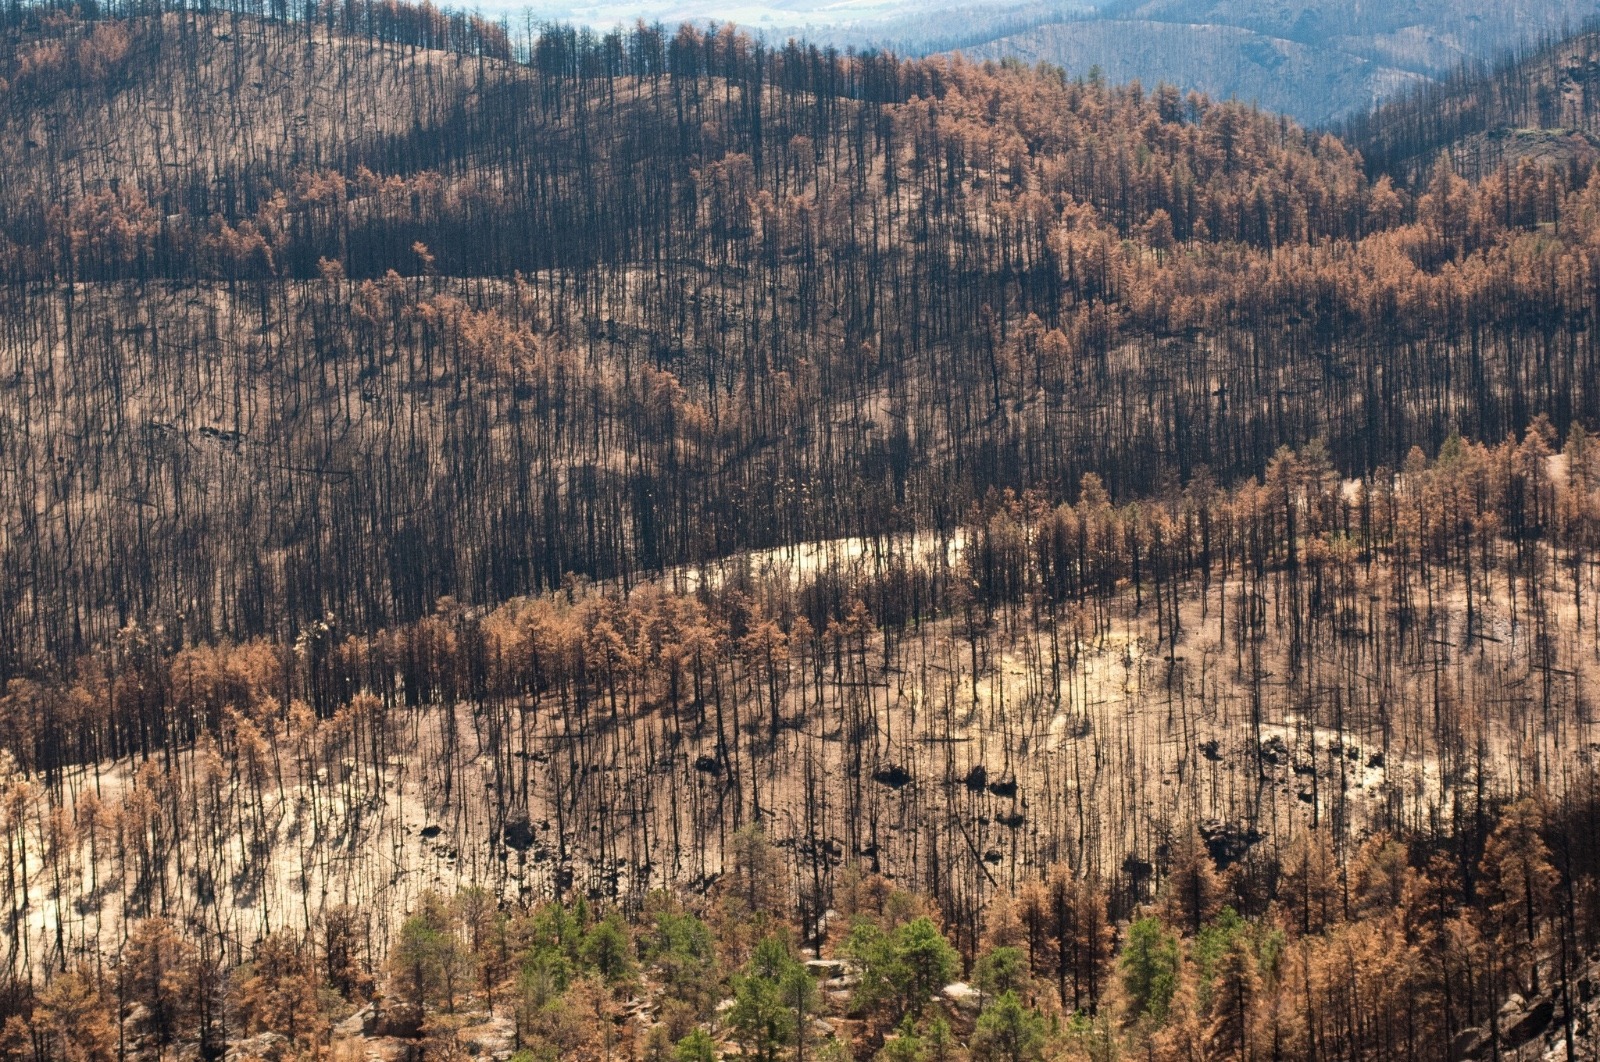 As western forests dry, trees become weakened and, as Olsen says, are 